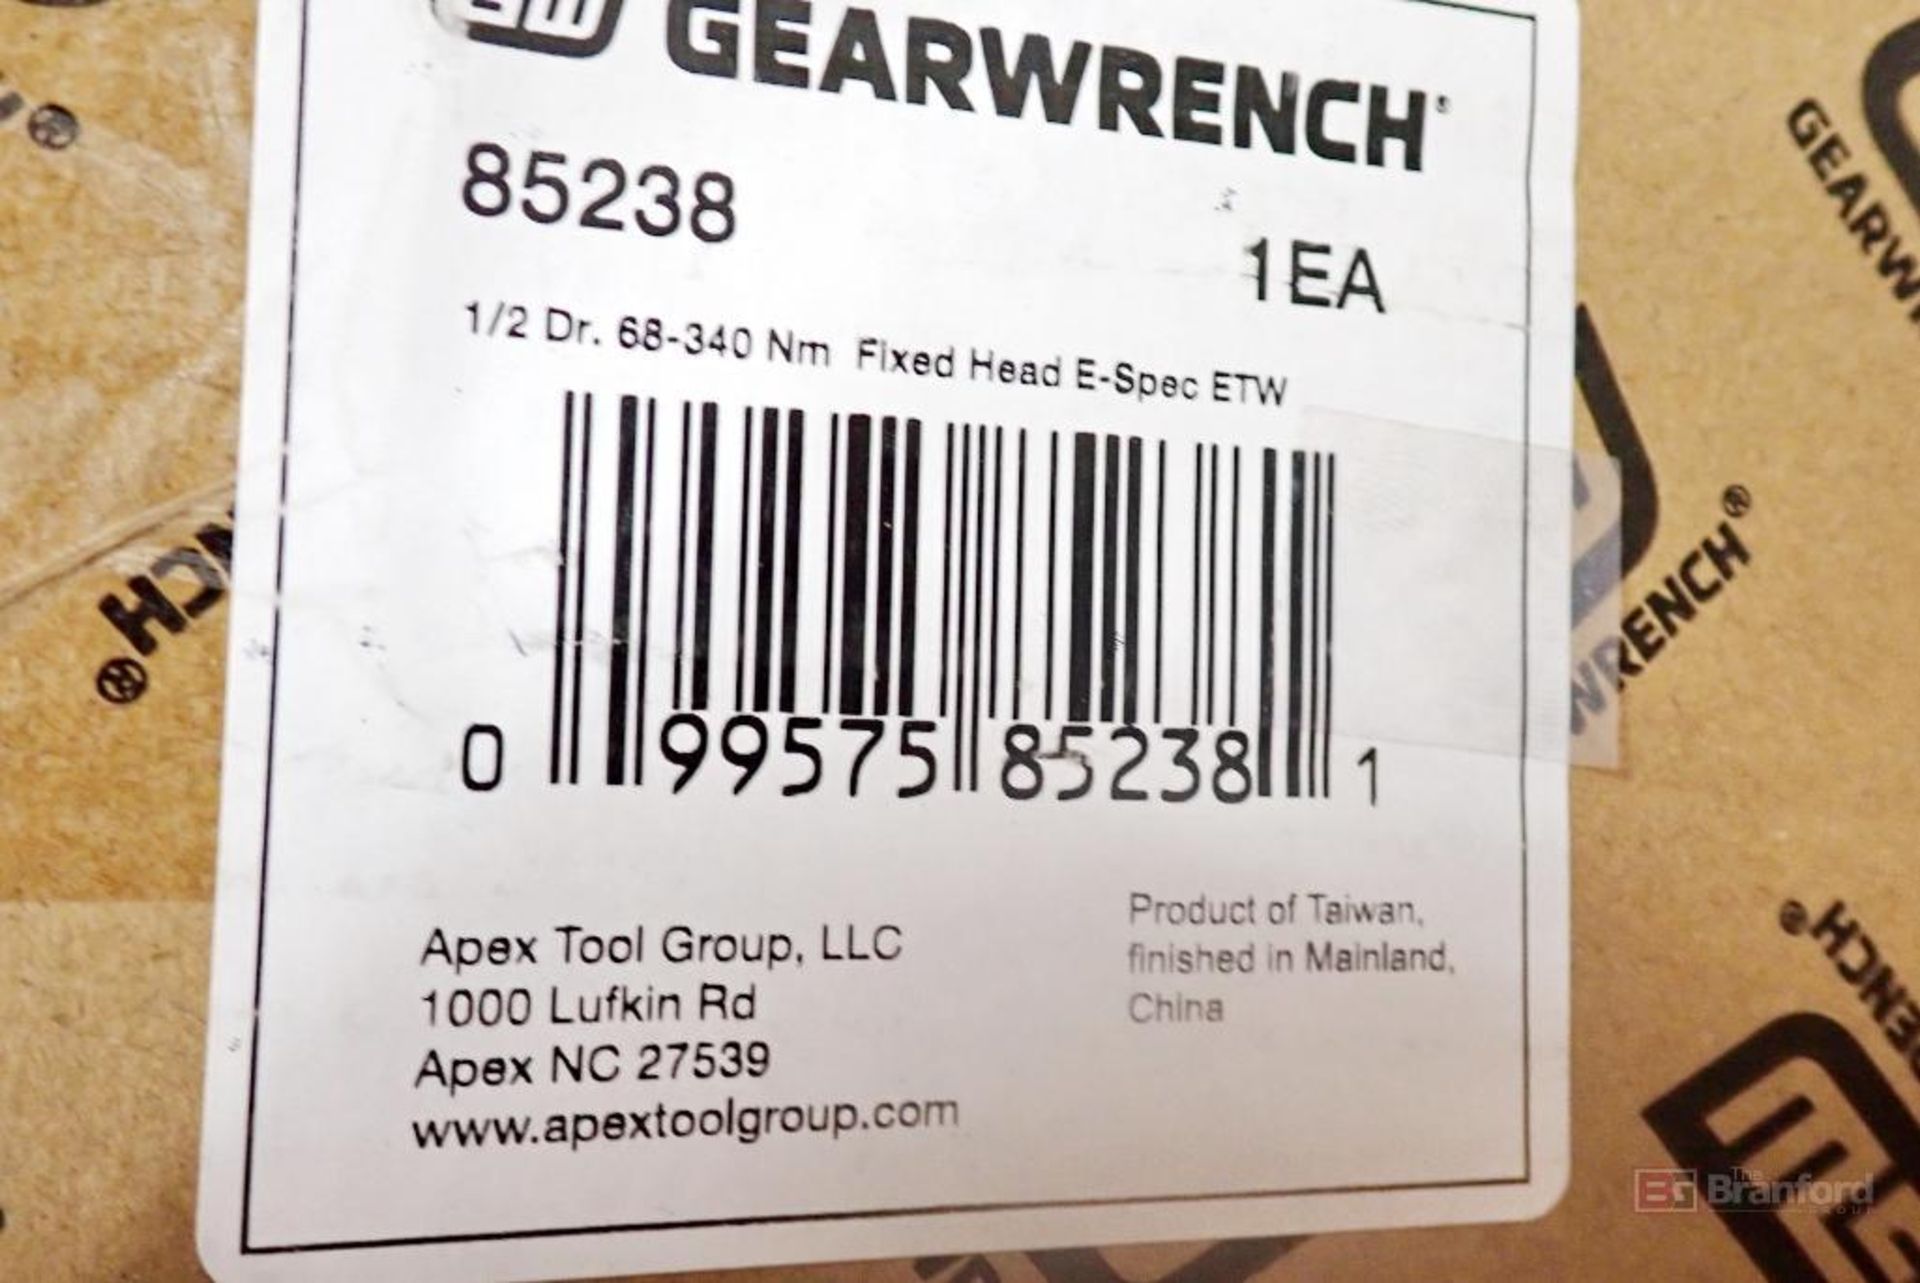 GearWrench 85238 1/2" Drive Fixed Head E-Spec Electronic Torque Wrench - Image 2 of 4